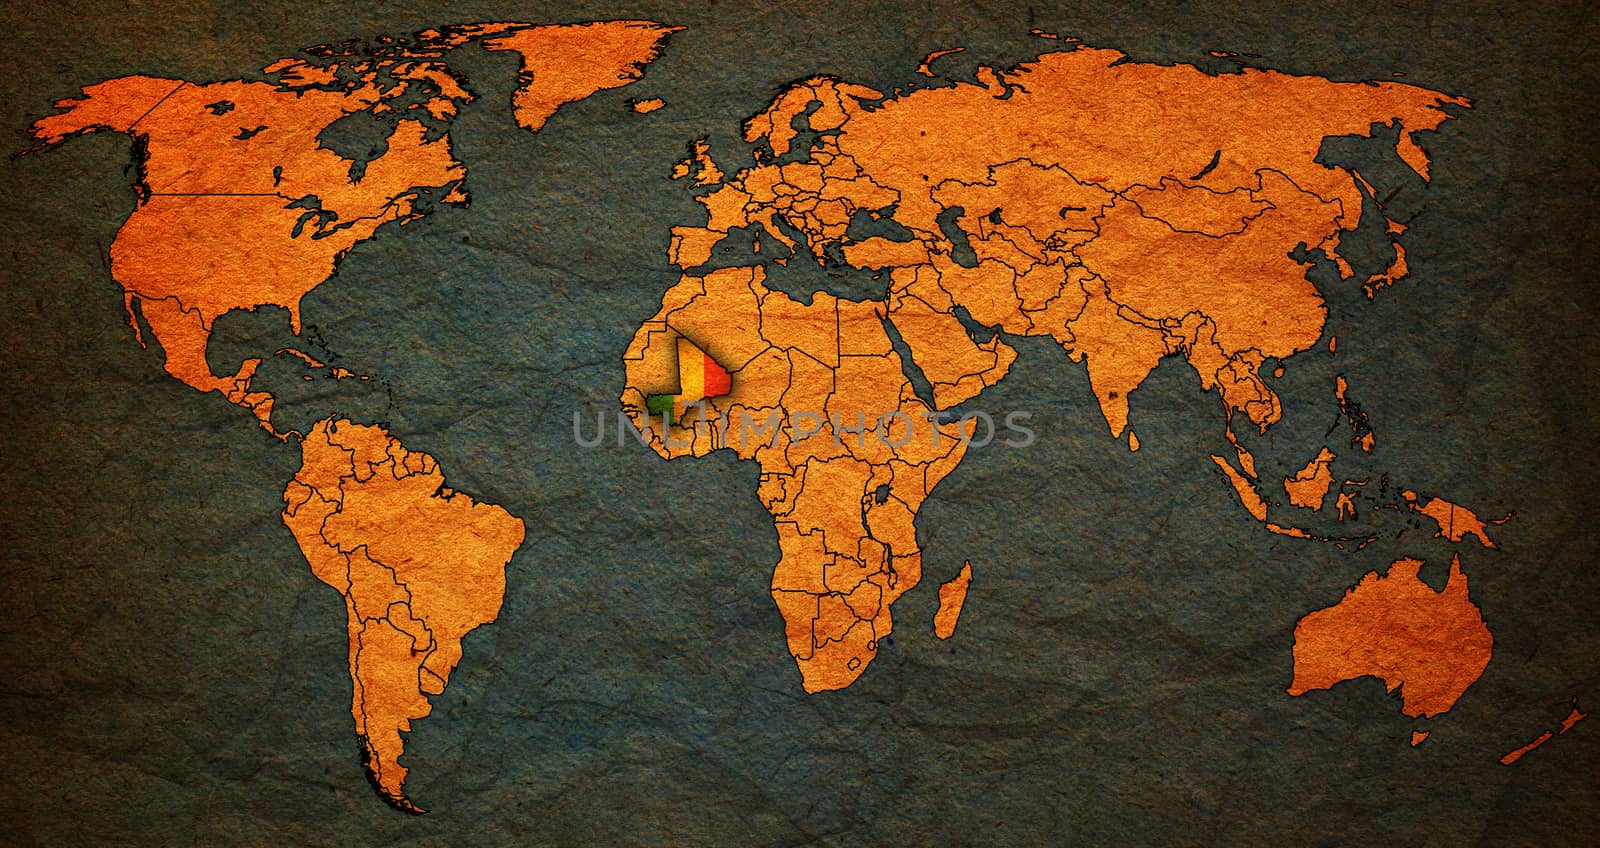 mali flag on old vintage world map with national borders